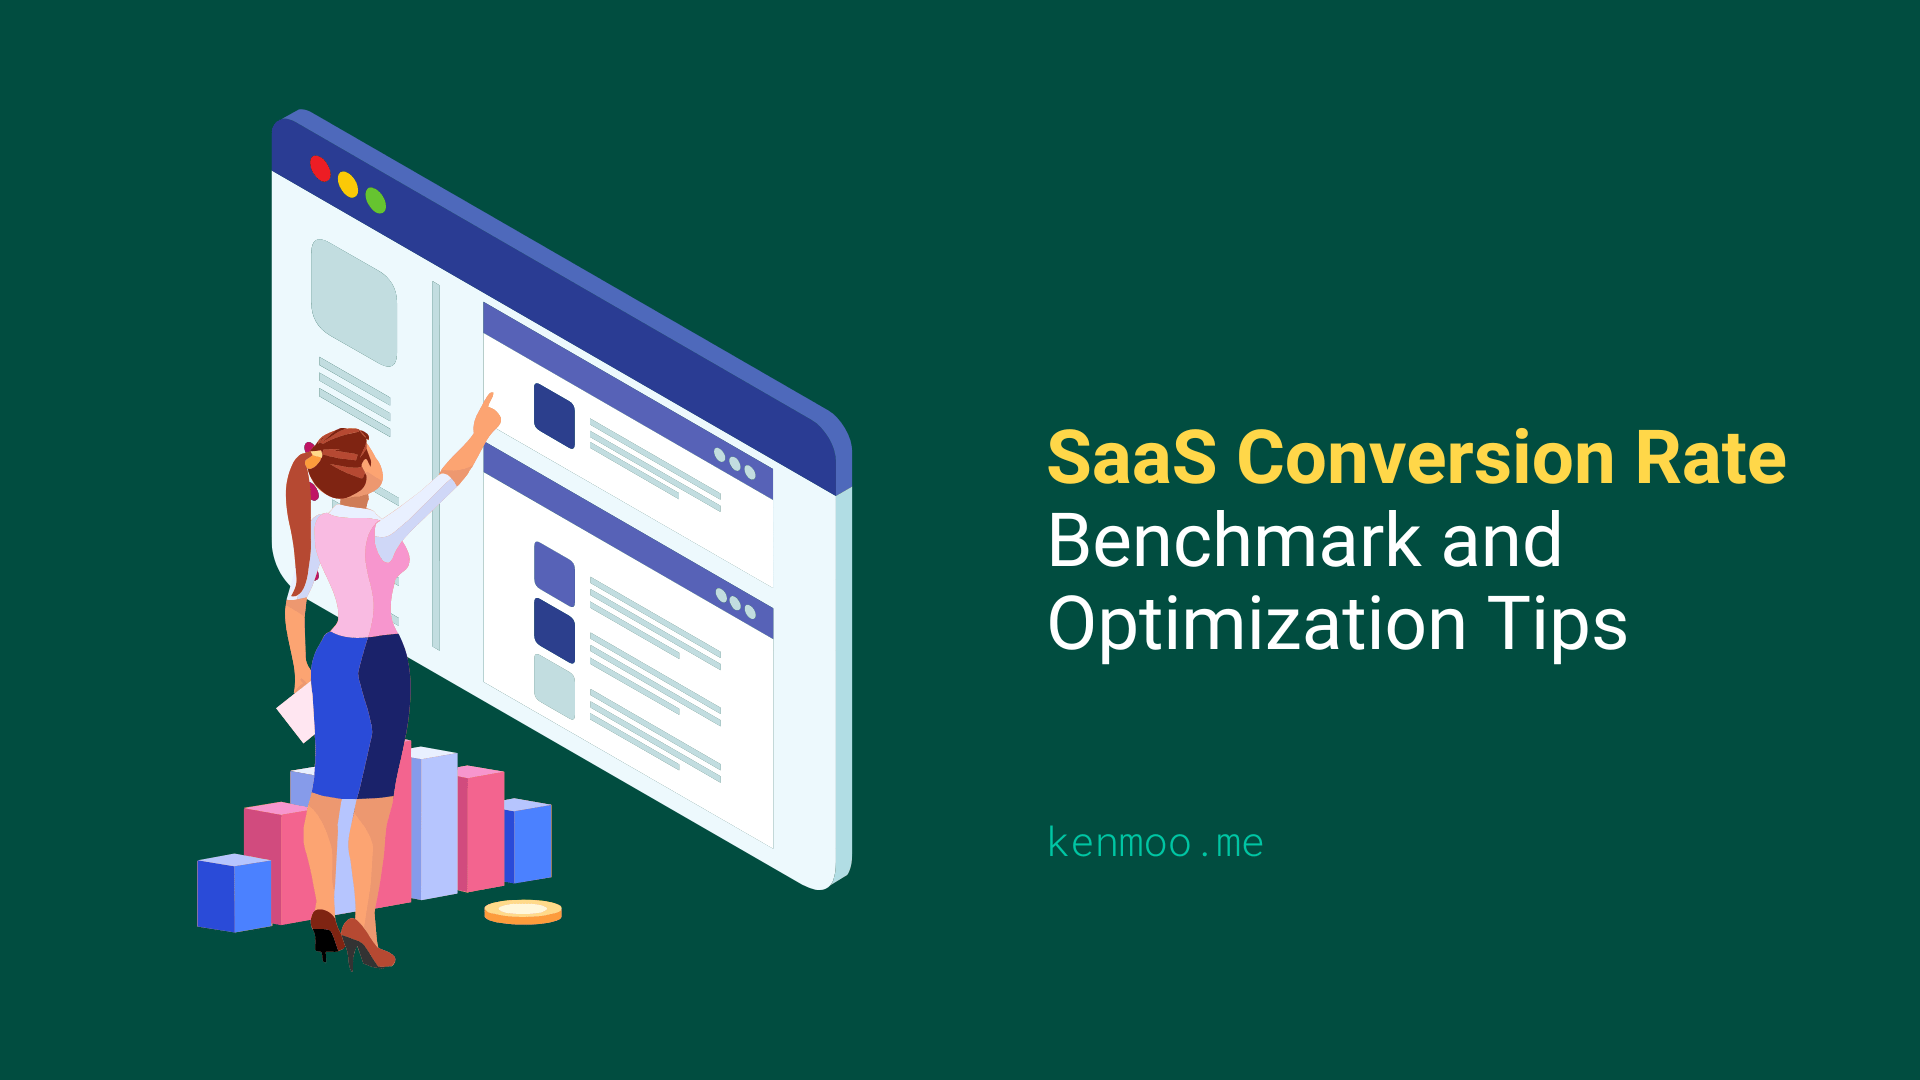 SaaS Conversion Rate Benchmark and Optimization Tips